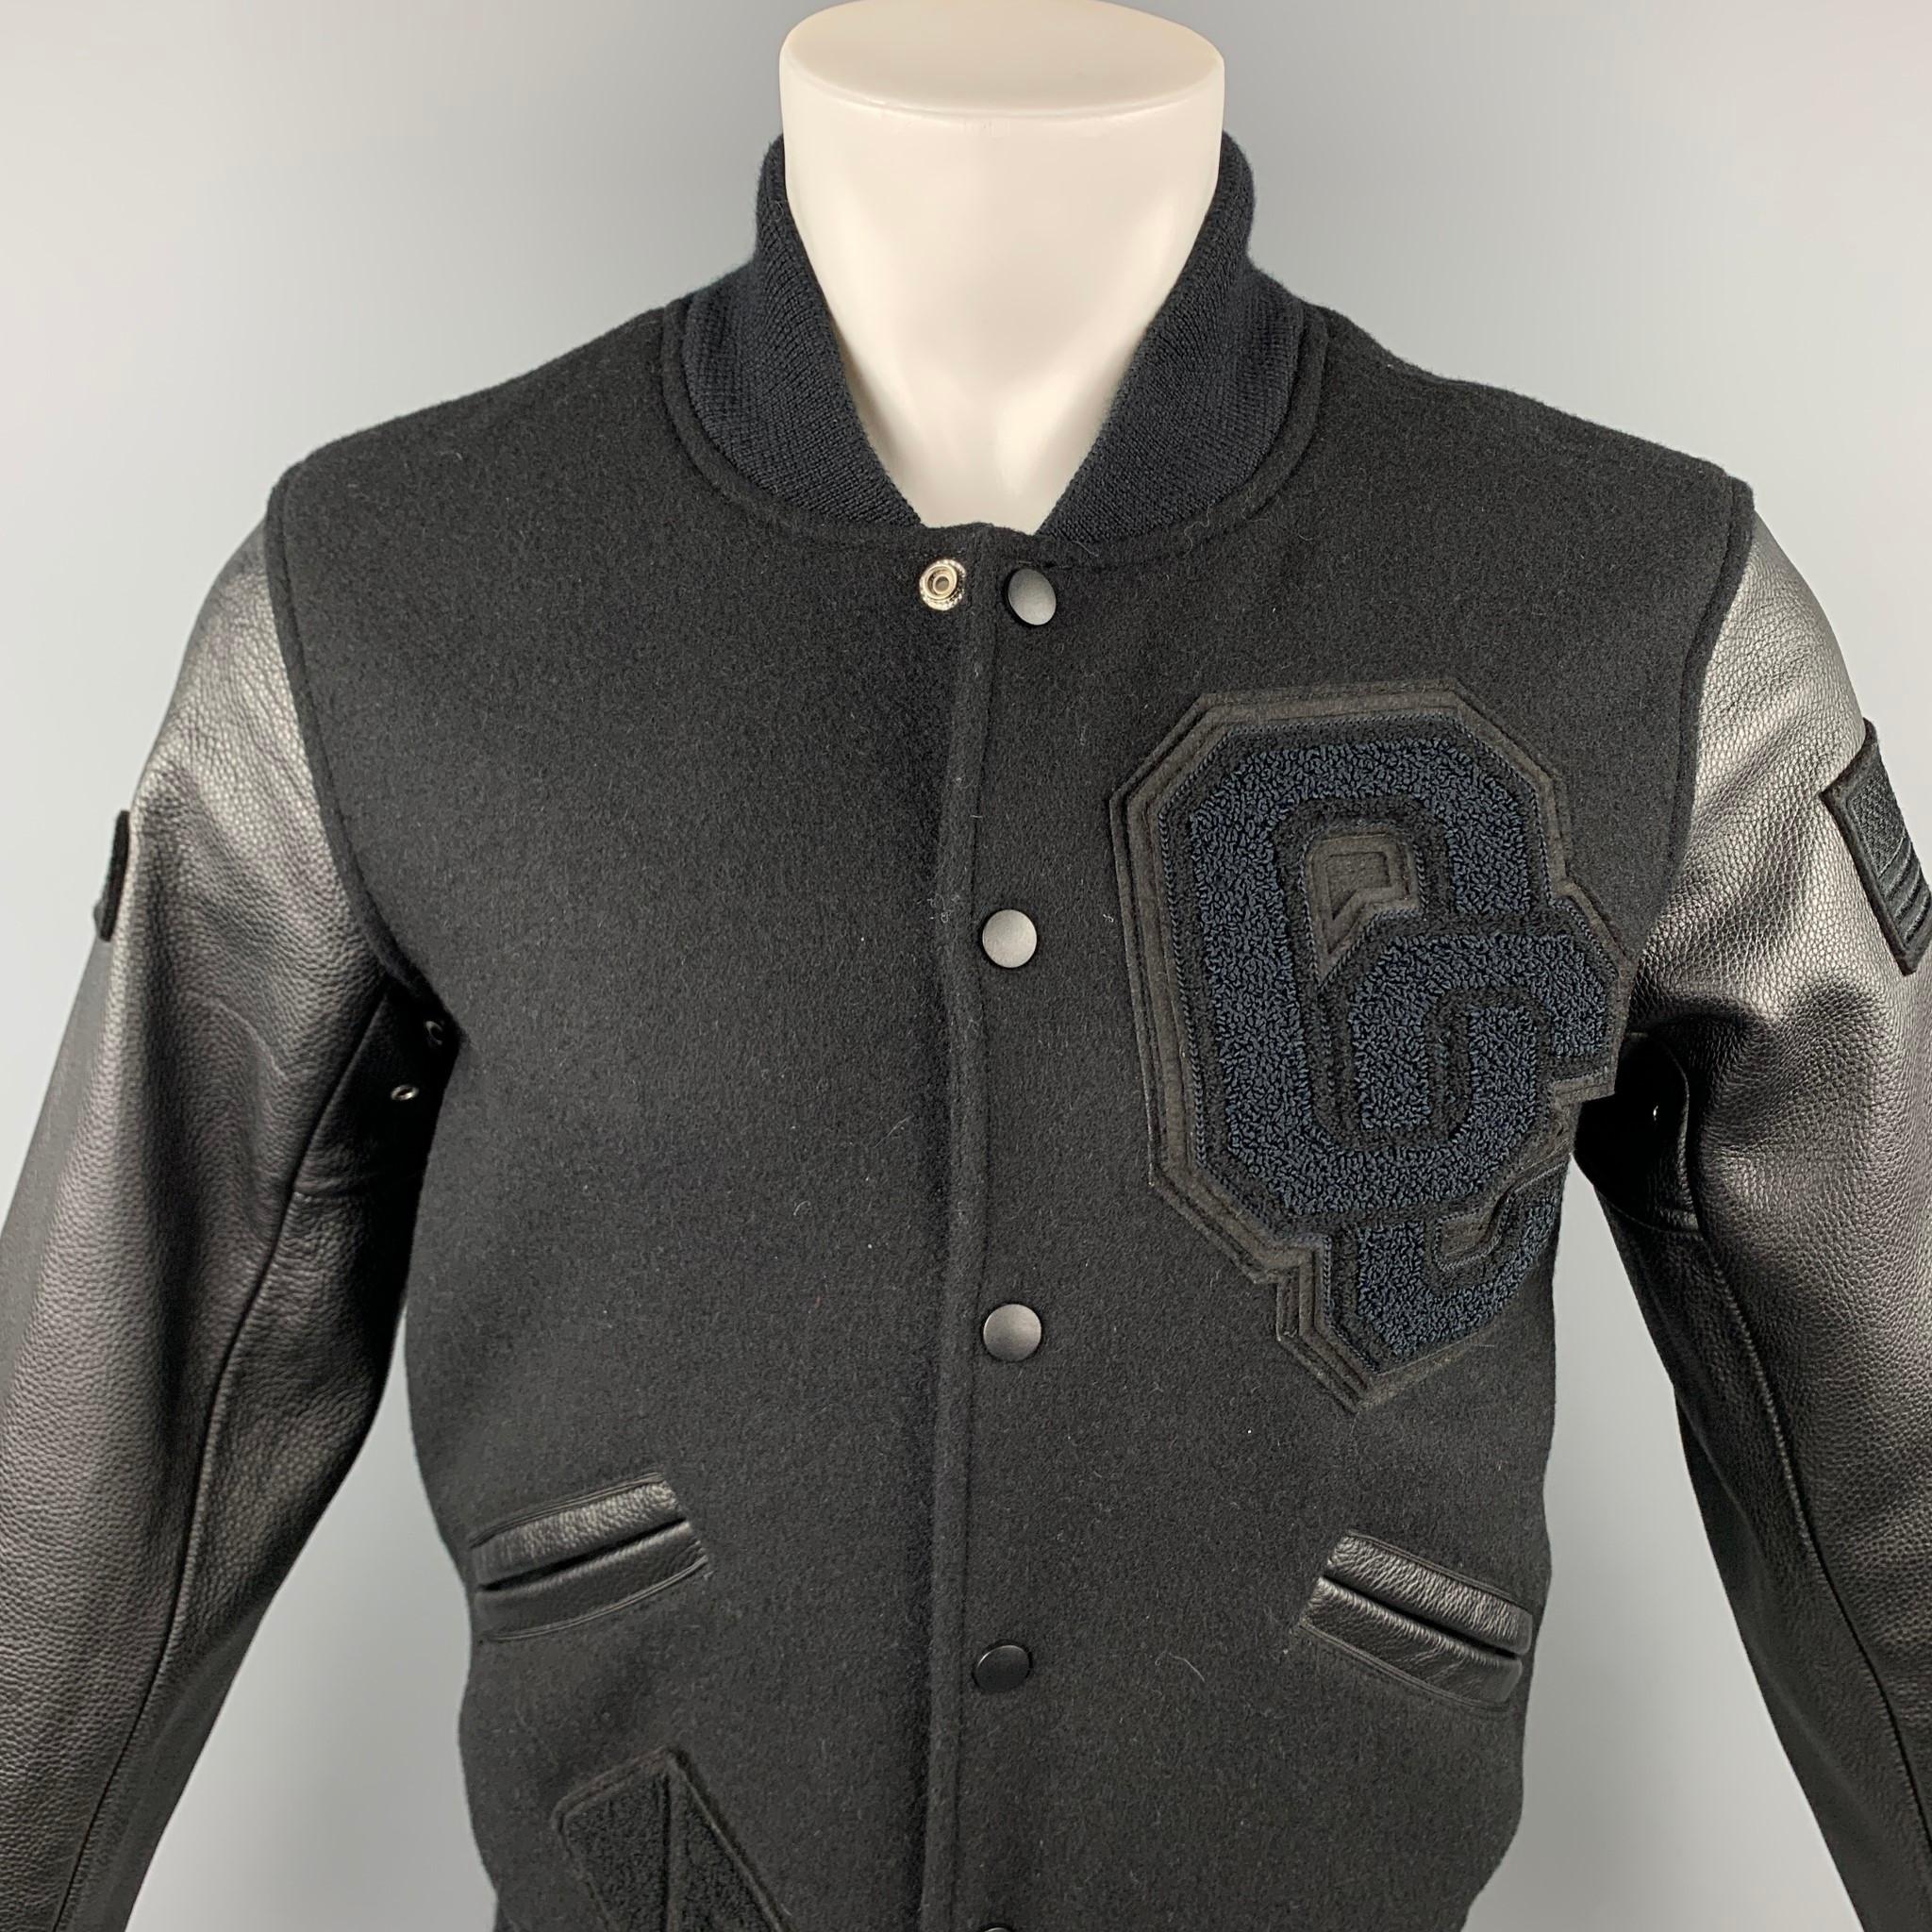 OPENING CEREMONY jacket comes in a black wool with leather sleeves featuring a varsity style, patch details, full liner, slit pockets, and a snap button closure. 

Very Good Pre-Owned Condition.
Marked: XS

Measurements:

Shoulder: 18 in.
Chest: 38